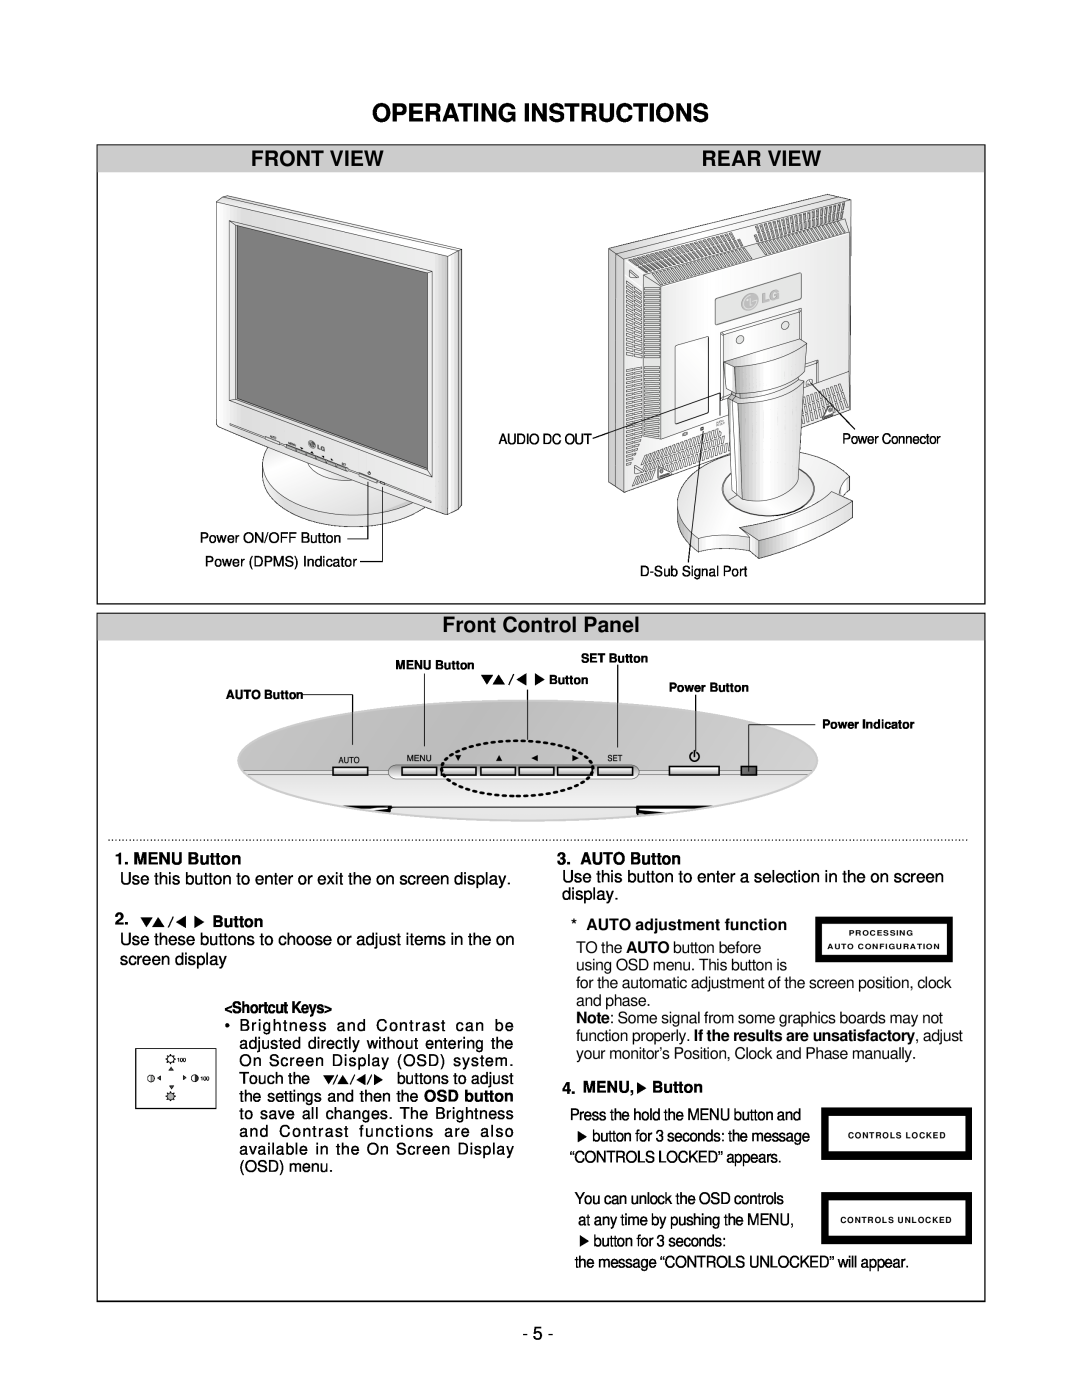 LG Electronics LCD 782LS Operating Instructions, Front View, Rear View, Front Control Panel, MENU Button, AUTO Button 